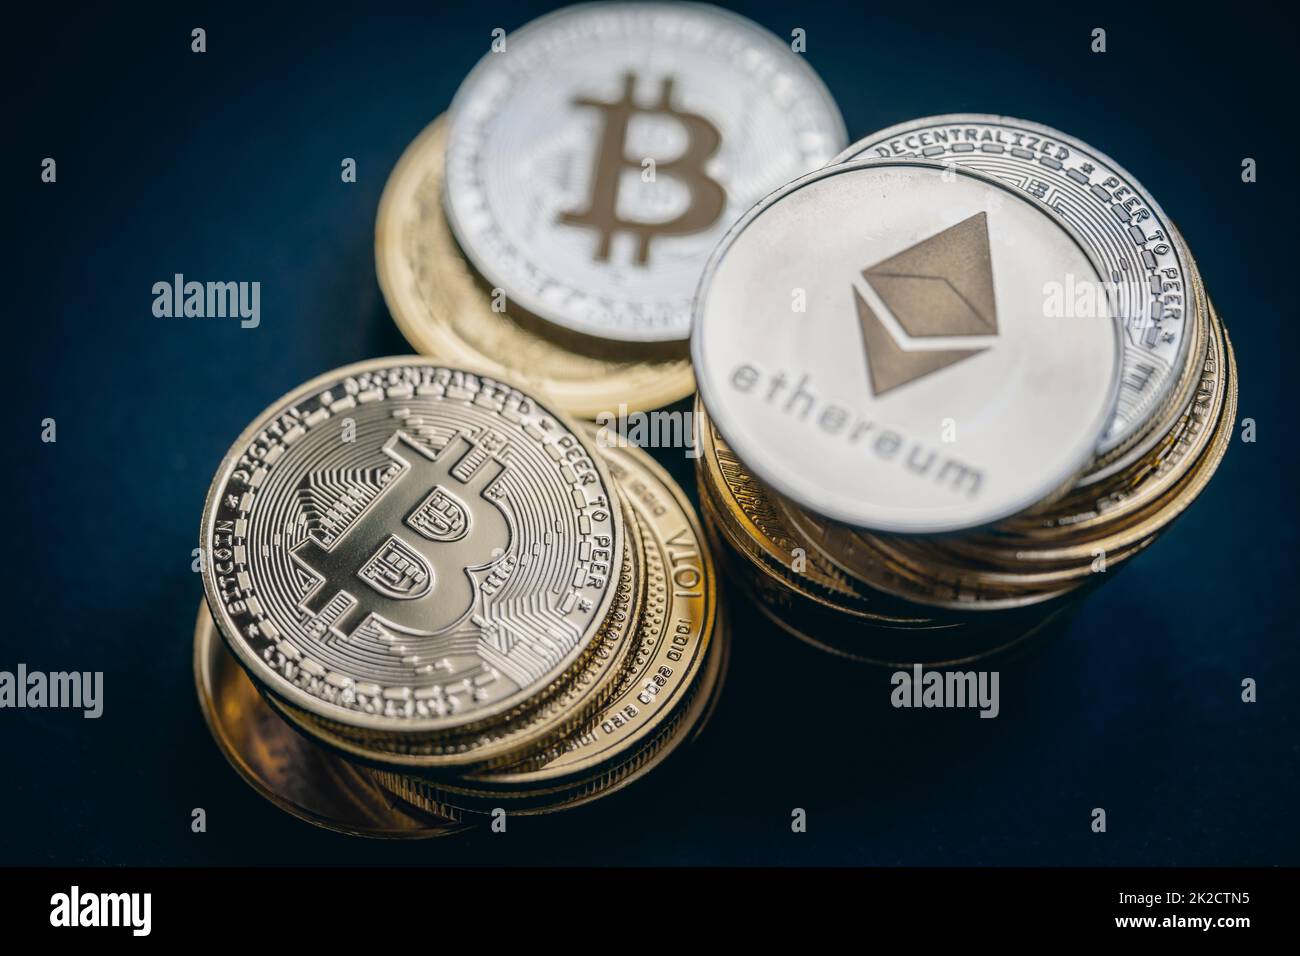 Close up shot of stacks of golden and silver Bitcoin and Ethereum digital cryptocurrency. Stock Photo